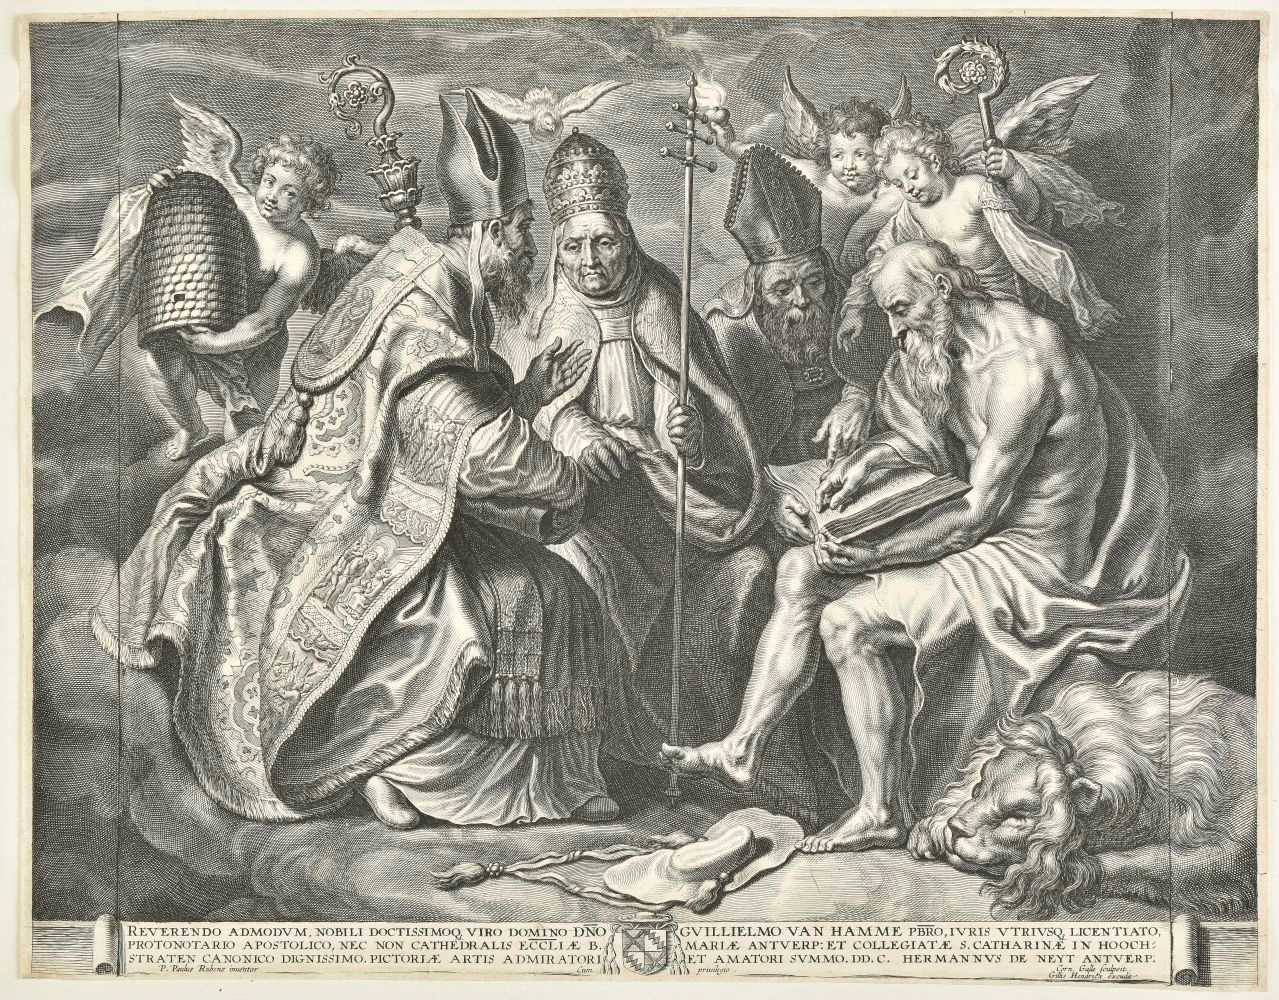 Lot 242 - Galle (Cornelis, the Elder, 1576 - 1656). Four Fathers of the Church (after Peter Paul
Rubens)